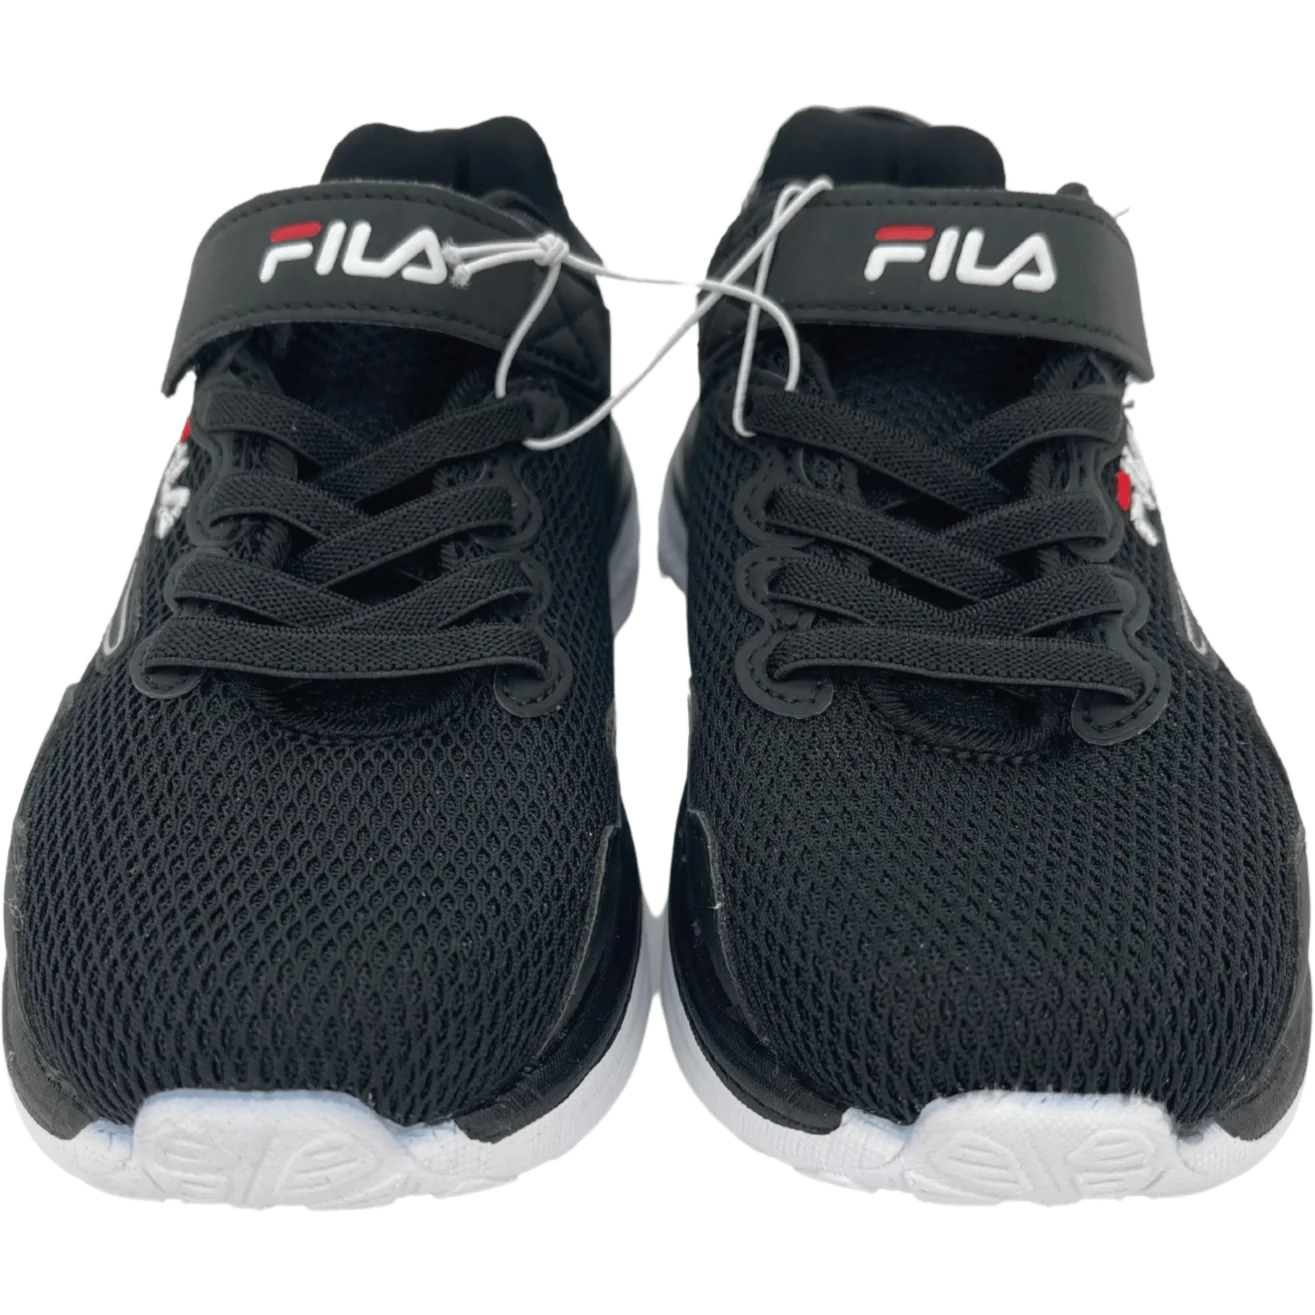 Fila Boy's Running Shoes / Tactician Strap / Black, White & Red / Various Sizes